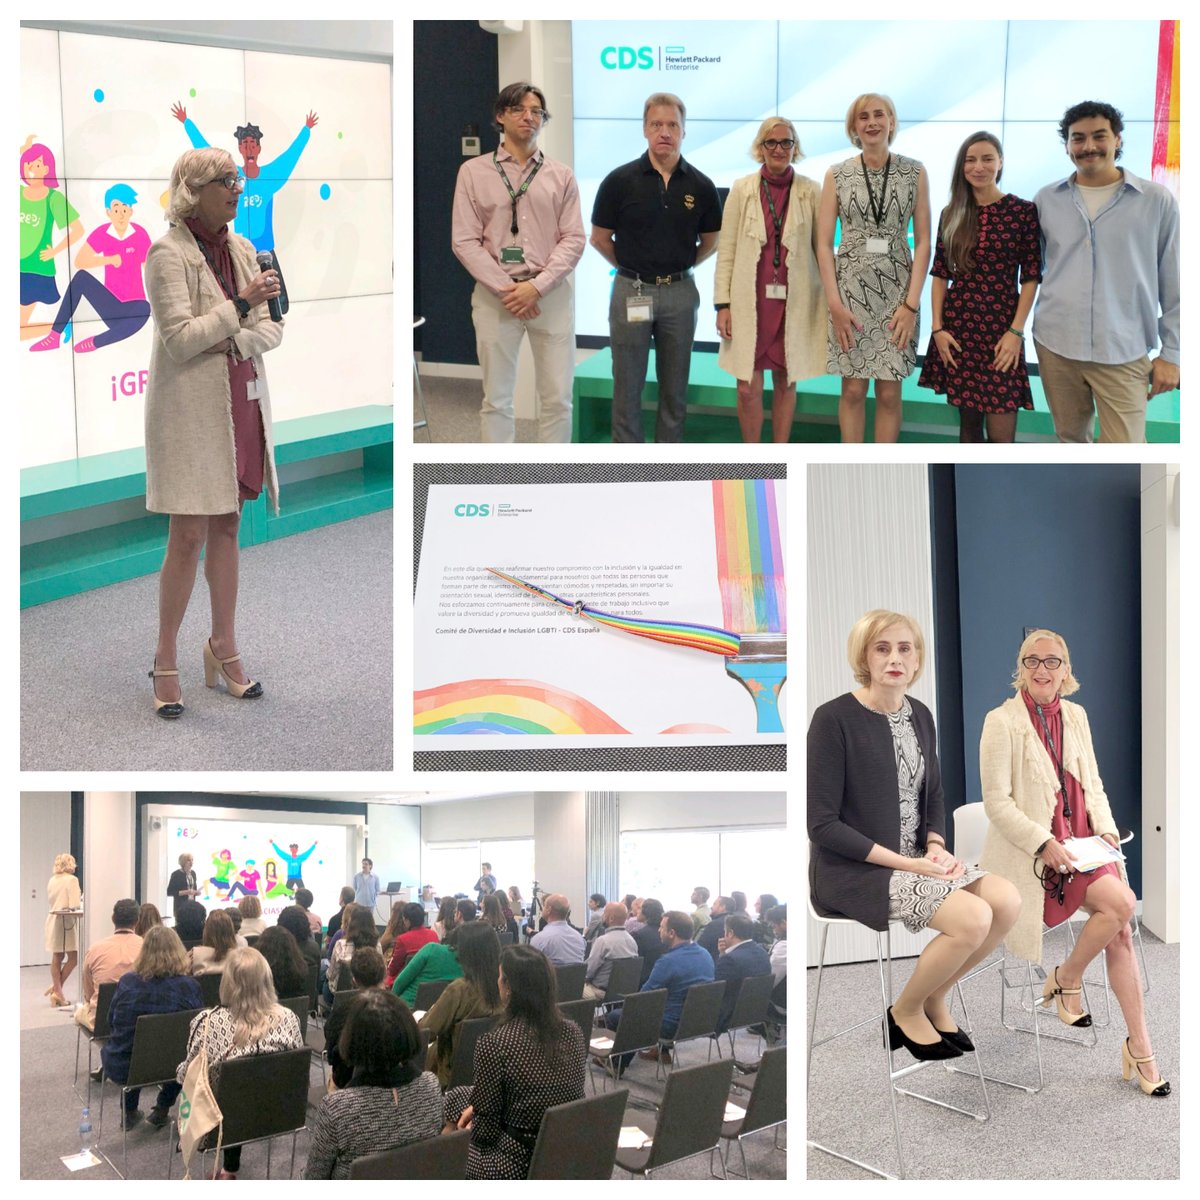 Yesterday we held the first #LGBTI Diversity and Inclusion event led by @HPECDS_ES. I would like to thank Ana Yañez, Infrastructure Support Specialist, for encouraging us to speak out regardless of sexual orientation. We also had the presence of @REDI_ES and @HPE_Espana.